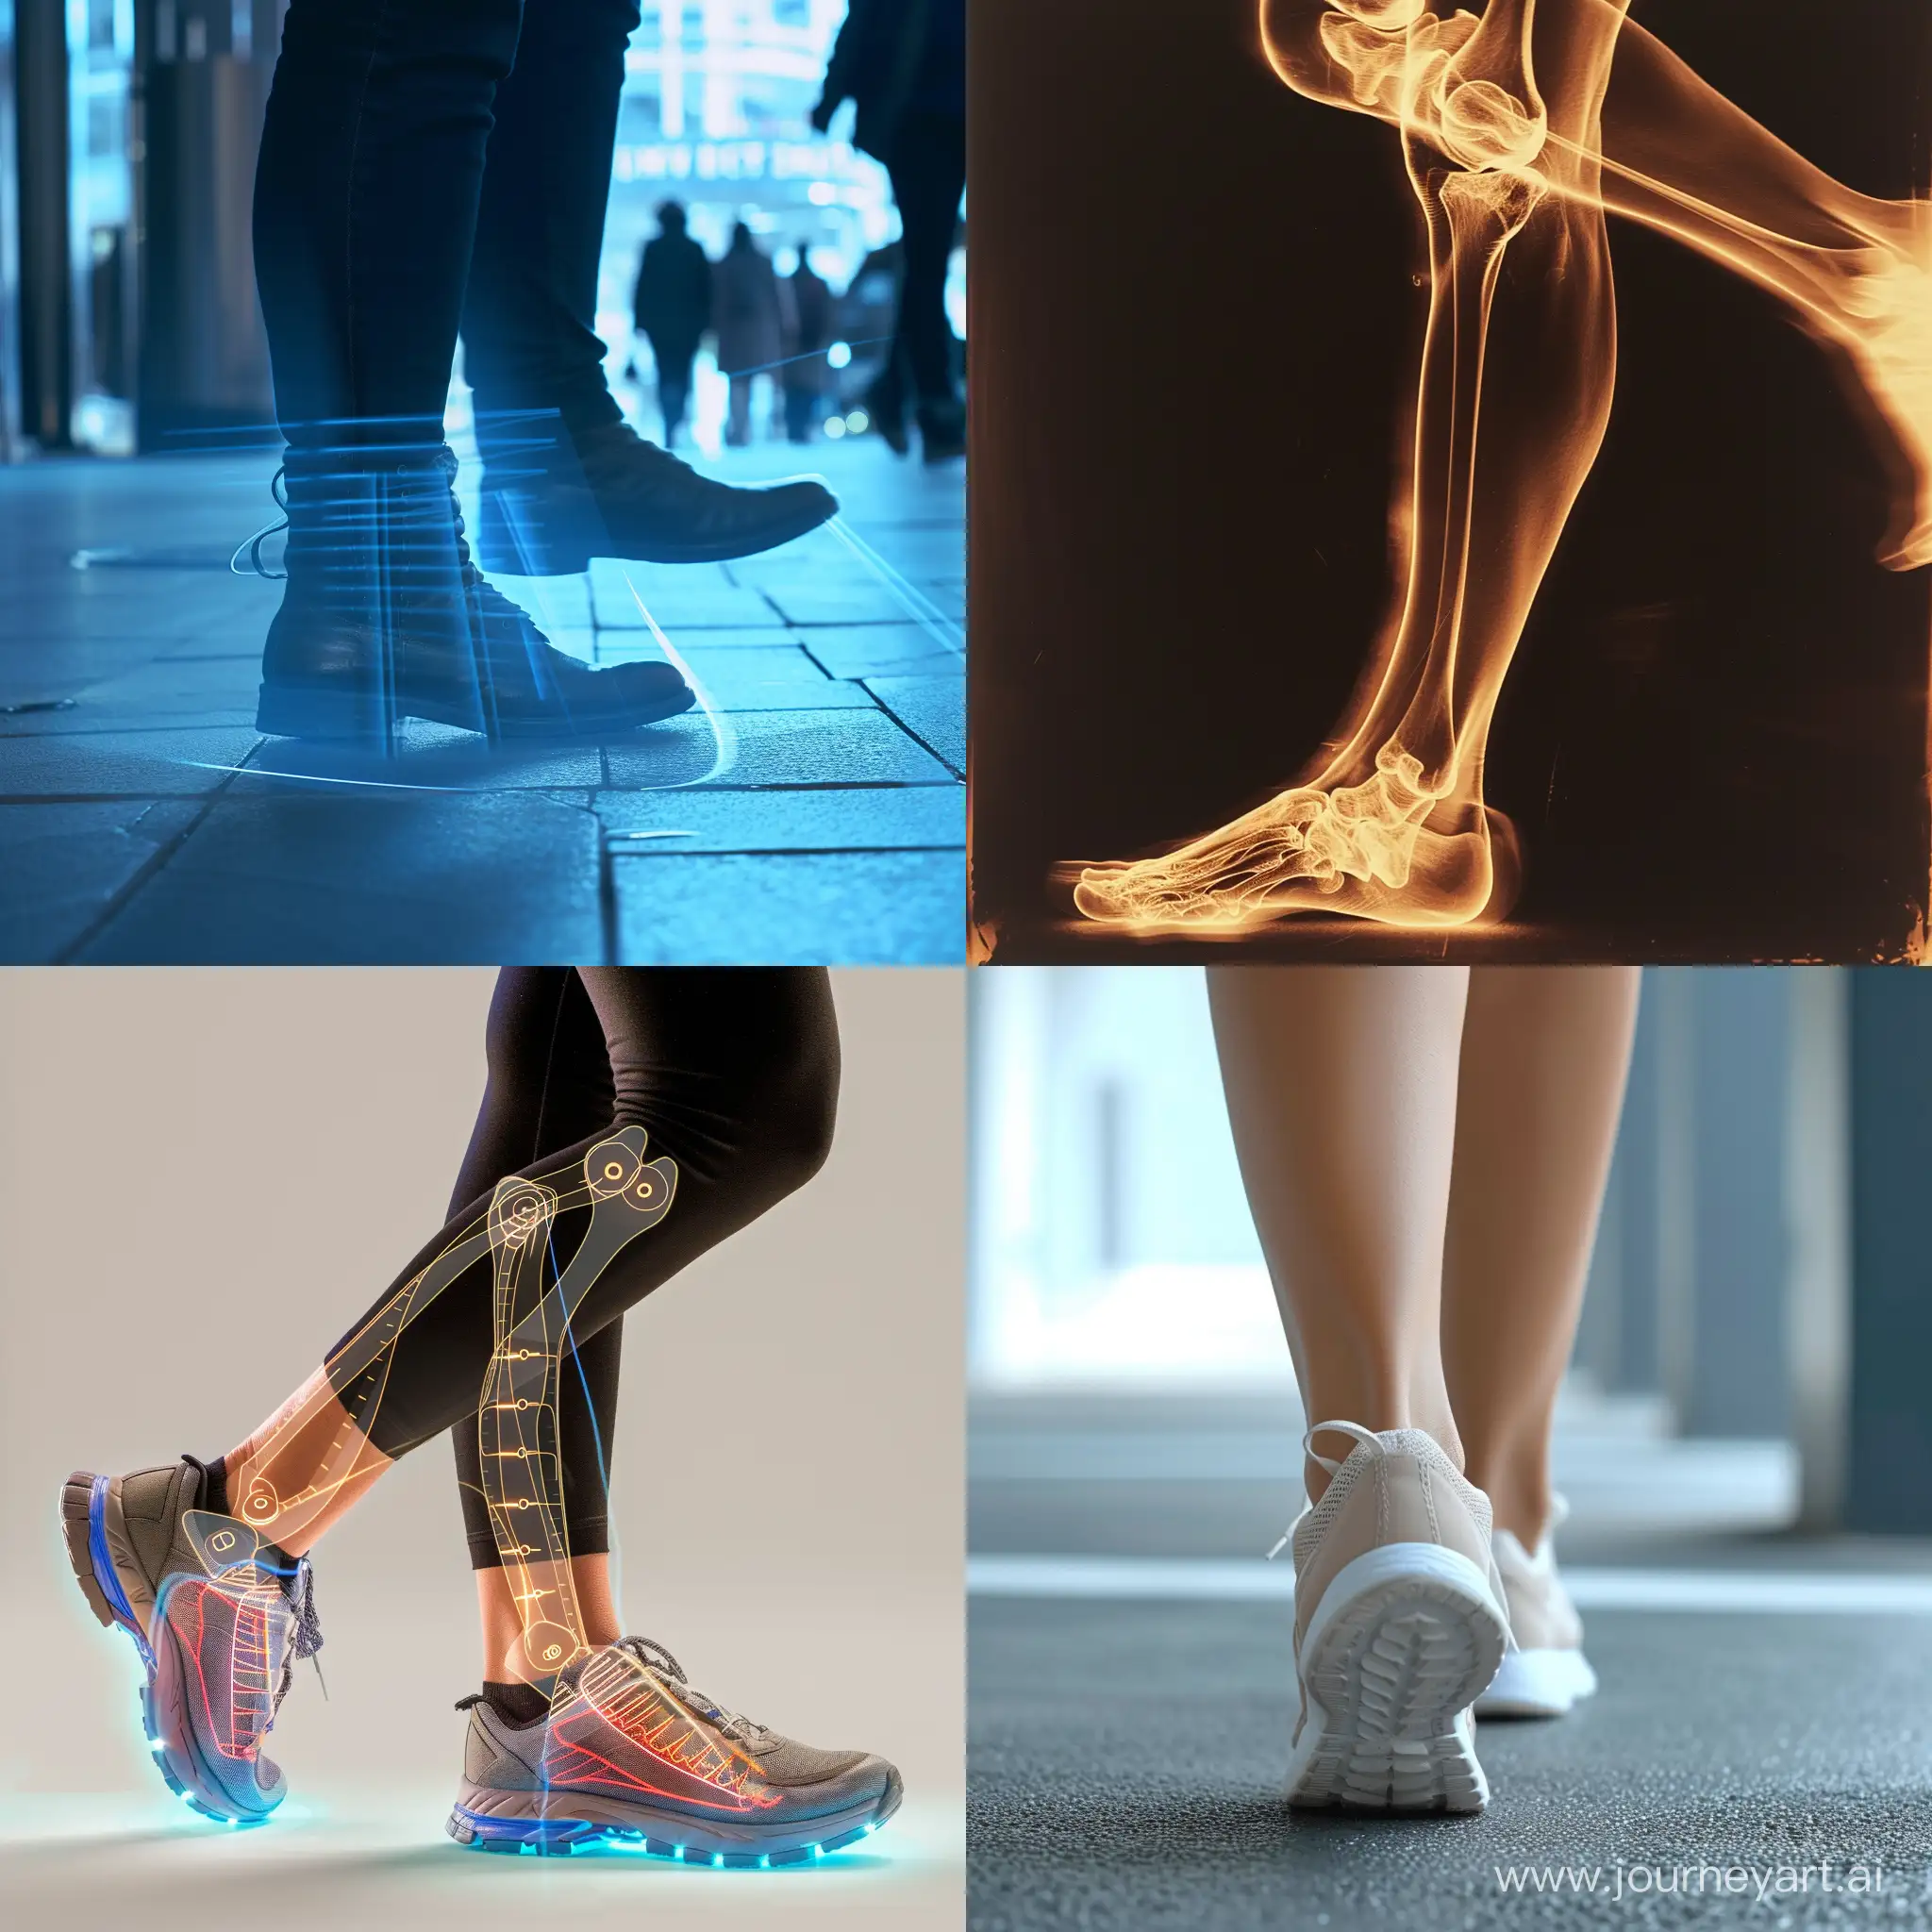 Identification-by-Gait-Person-Walking-in-Biometric-Recognition-System